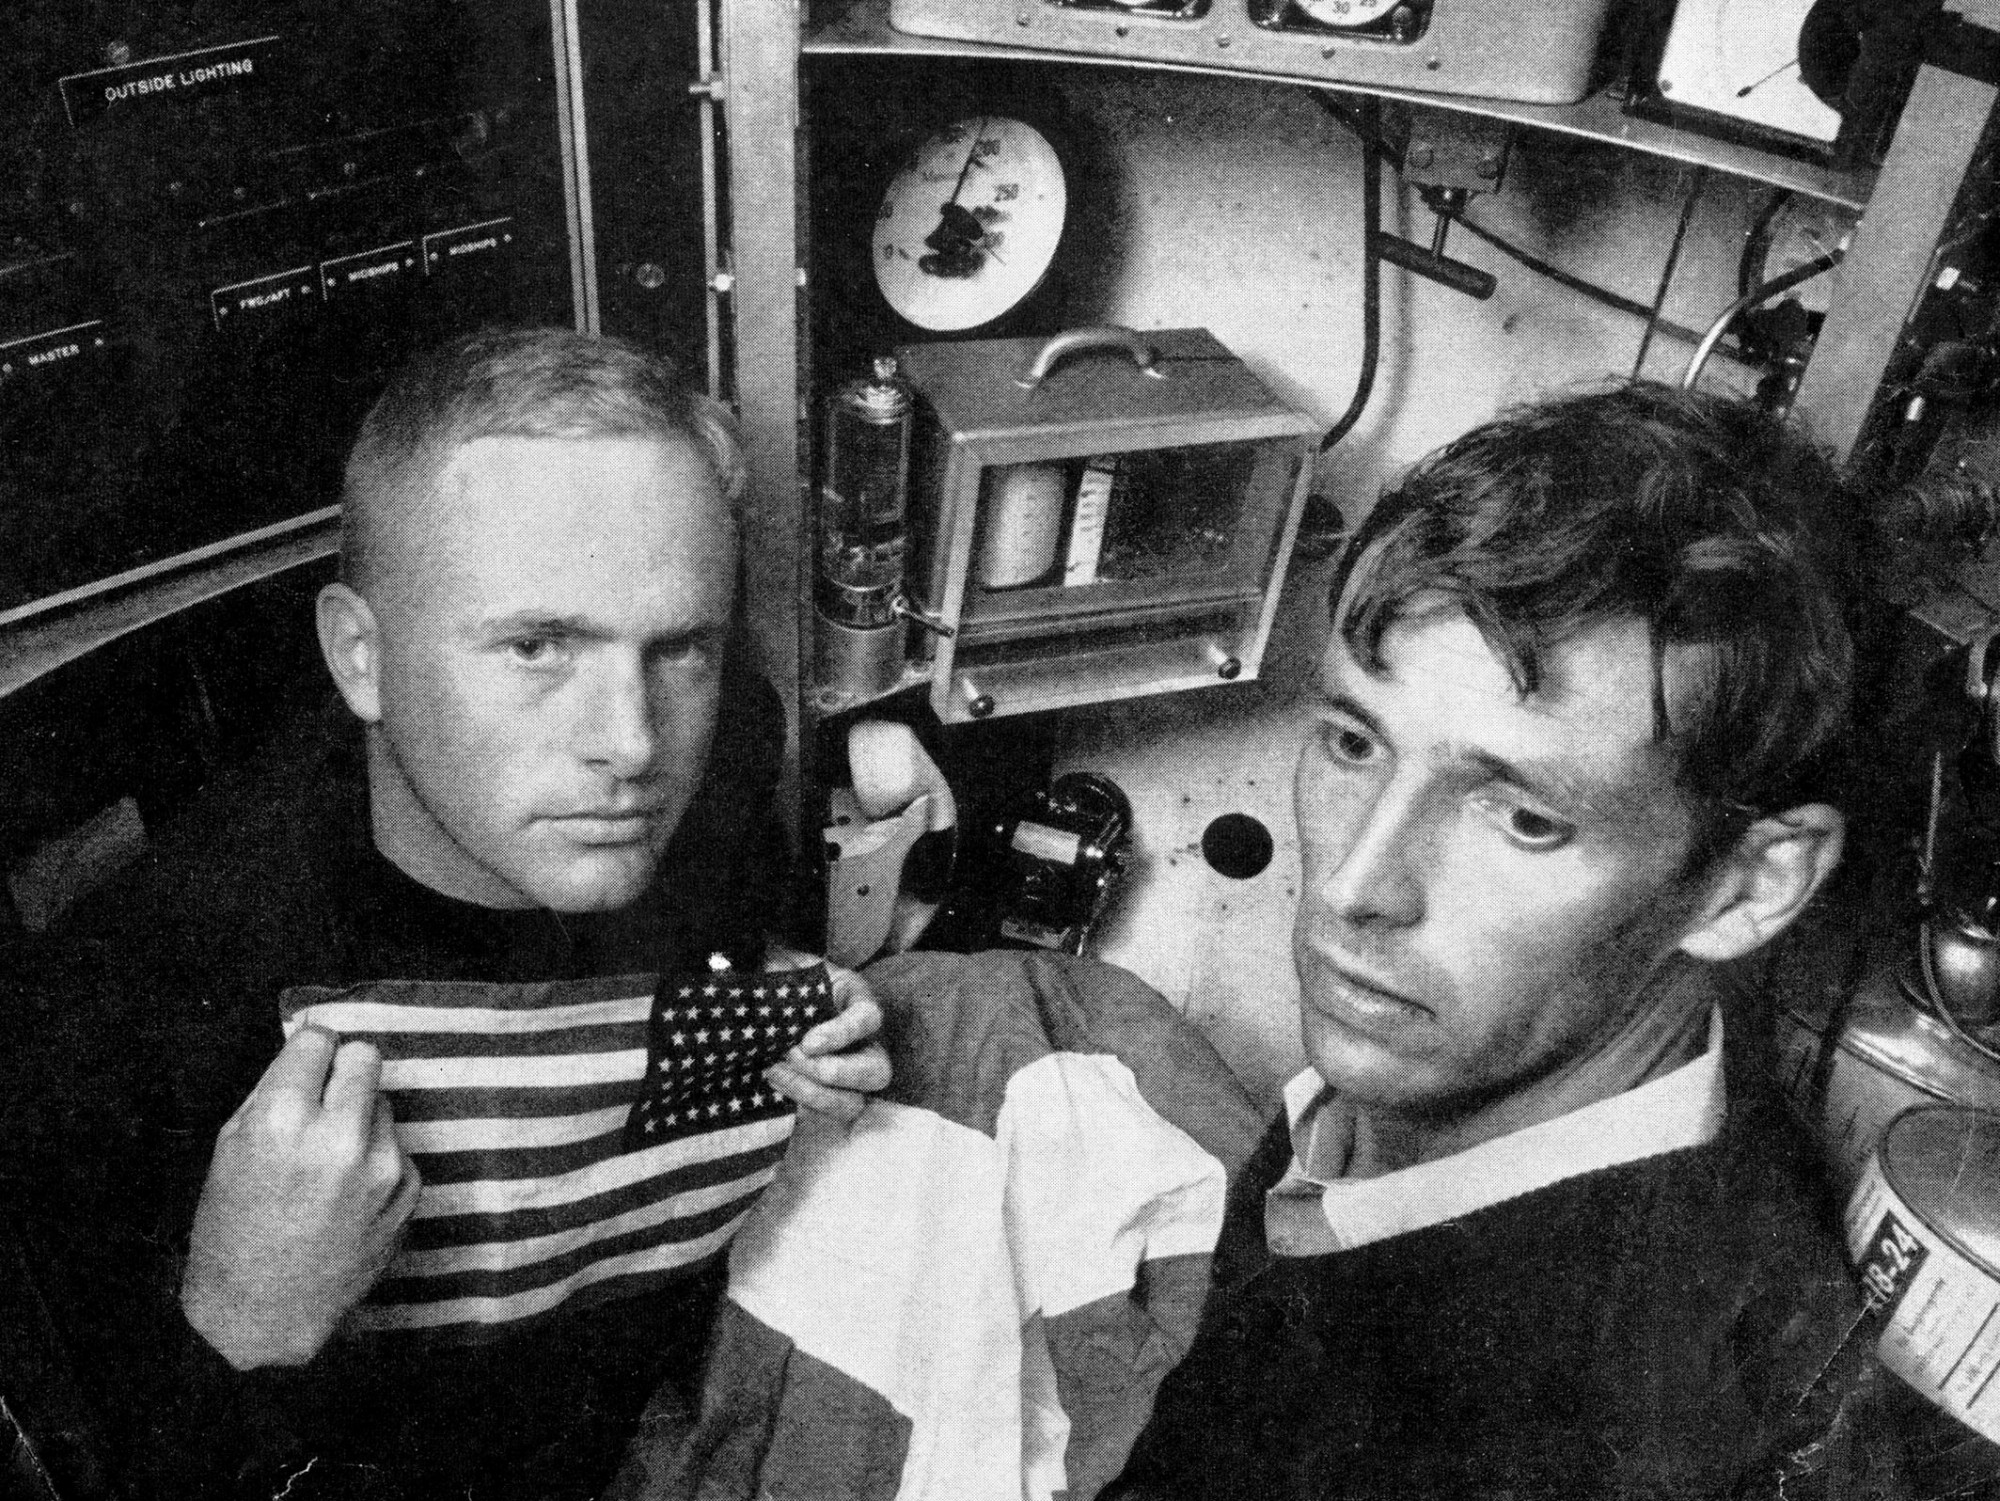 Lieutenant Don Walsh (left) and Jacques Piccard in the bathyscaphe.